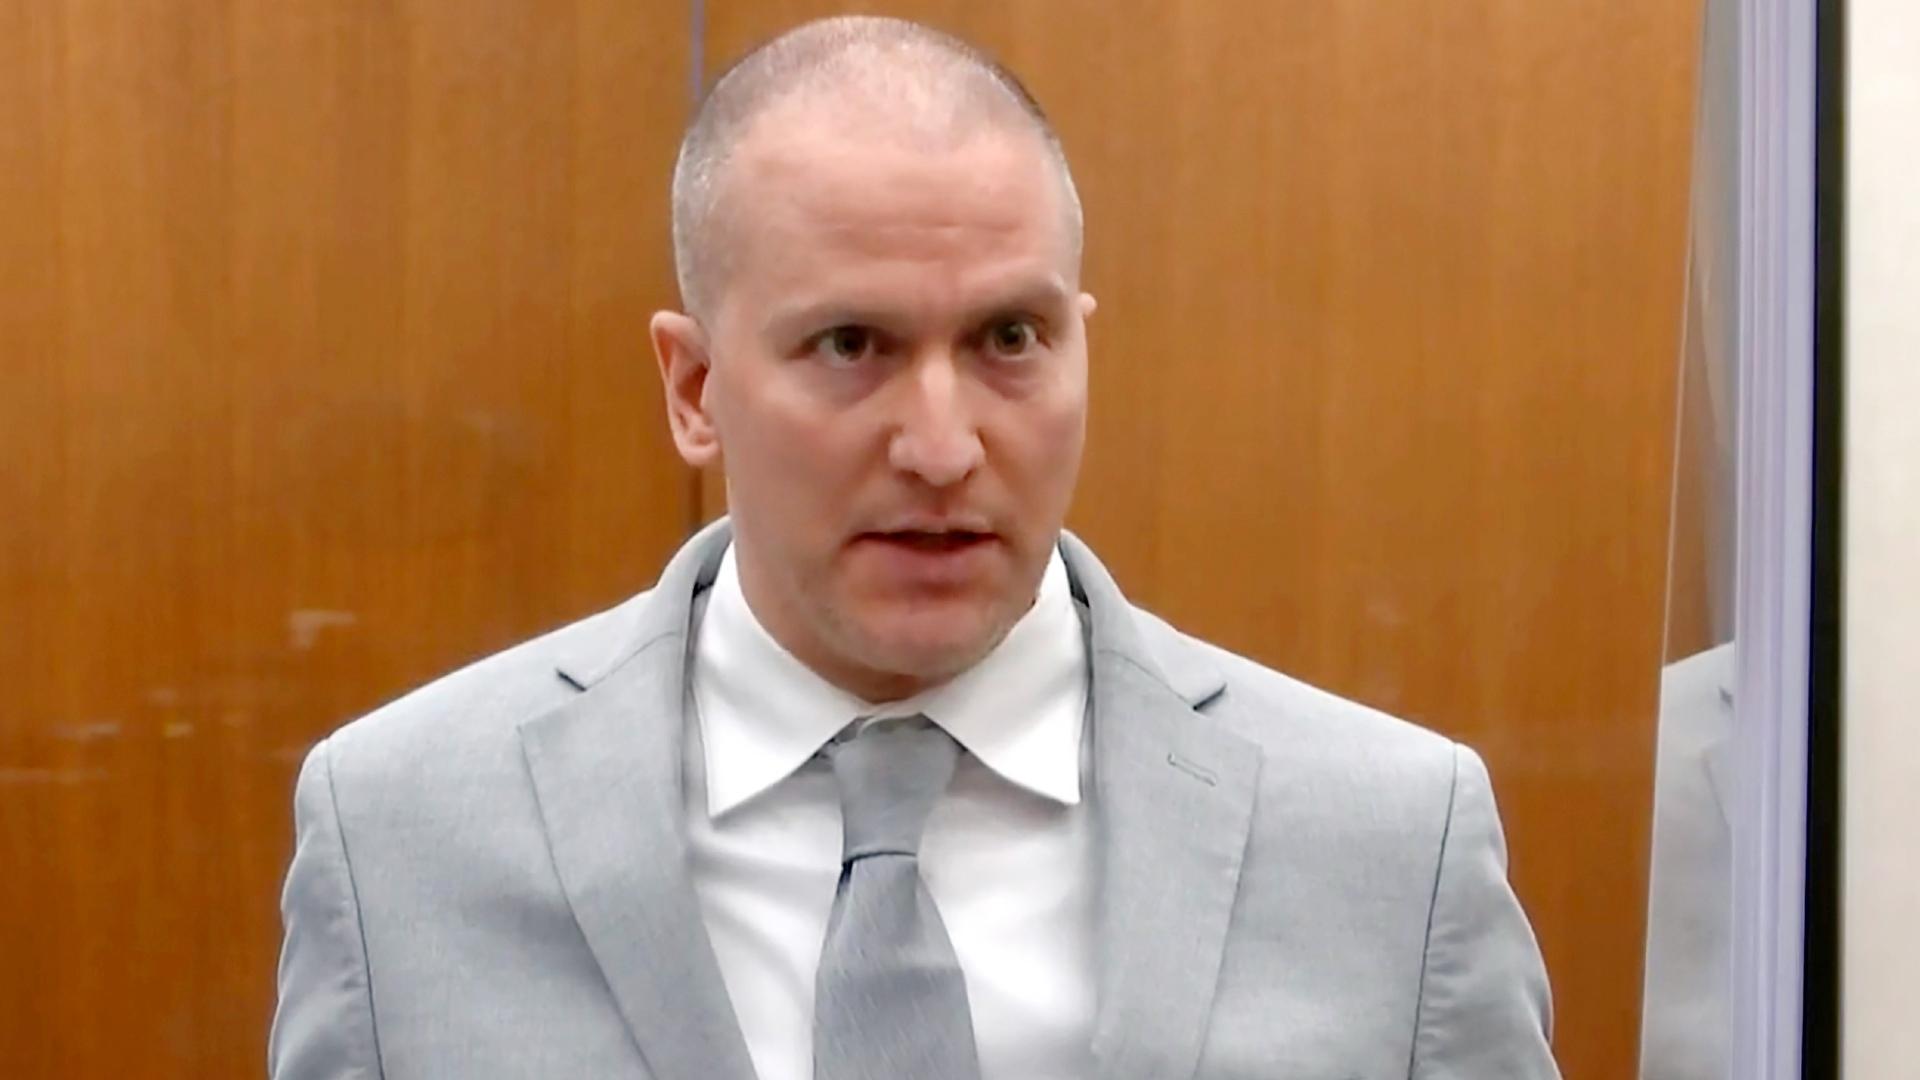 Former Minneapolis police Officer Derek Chauvin addresses the court as Hennepin County Judge Peter Cahill presides over Chauvin’s sentencing at the Hennepin County Courthouse in Minneapolis June 25, 2021.  (Court TV via AP, Pool, File)